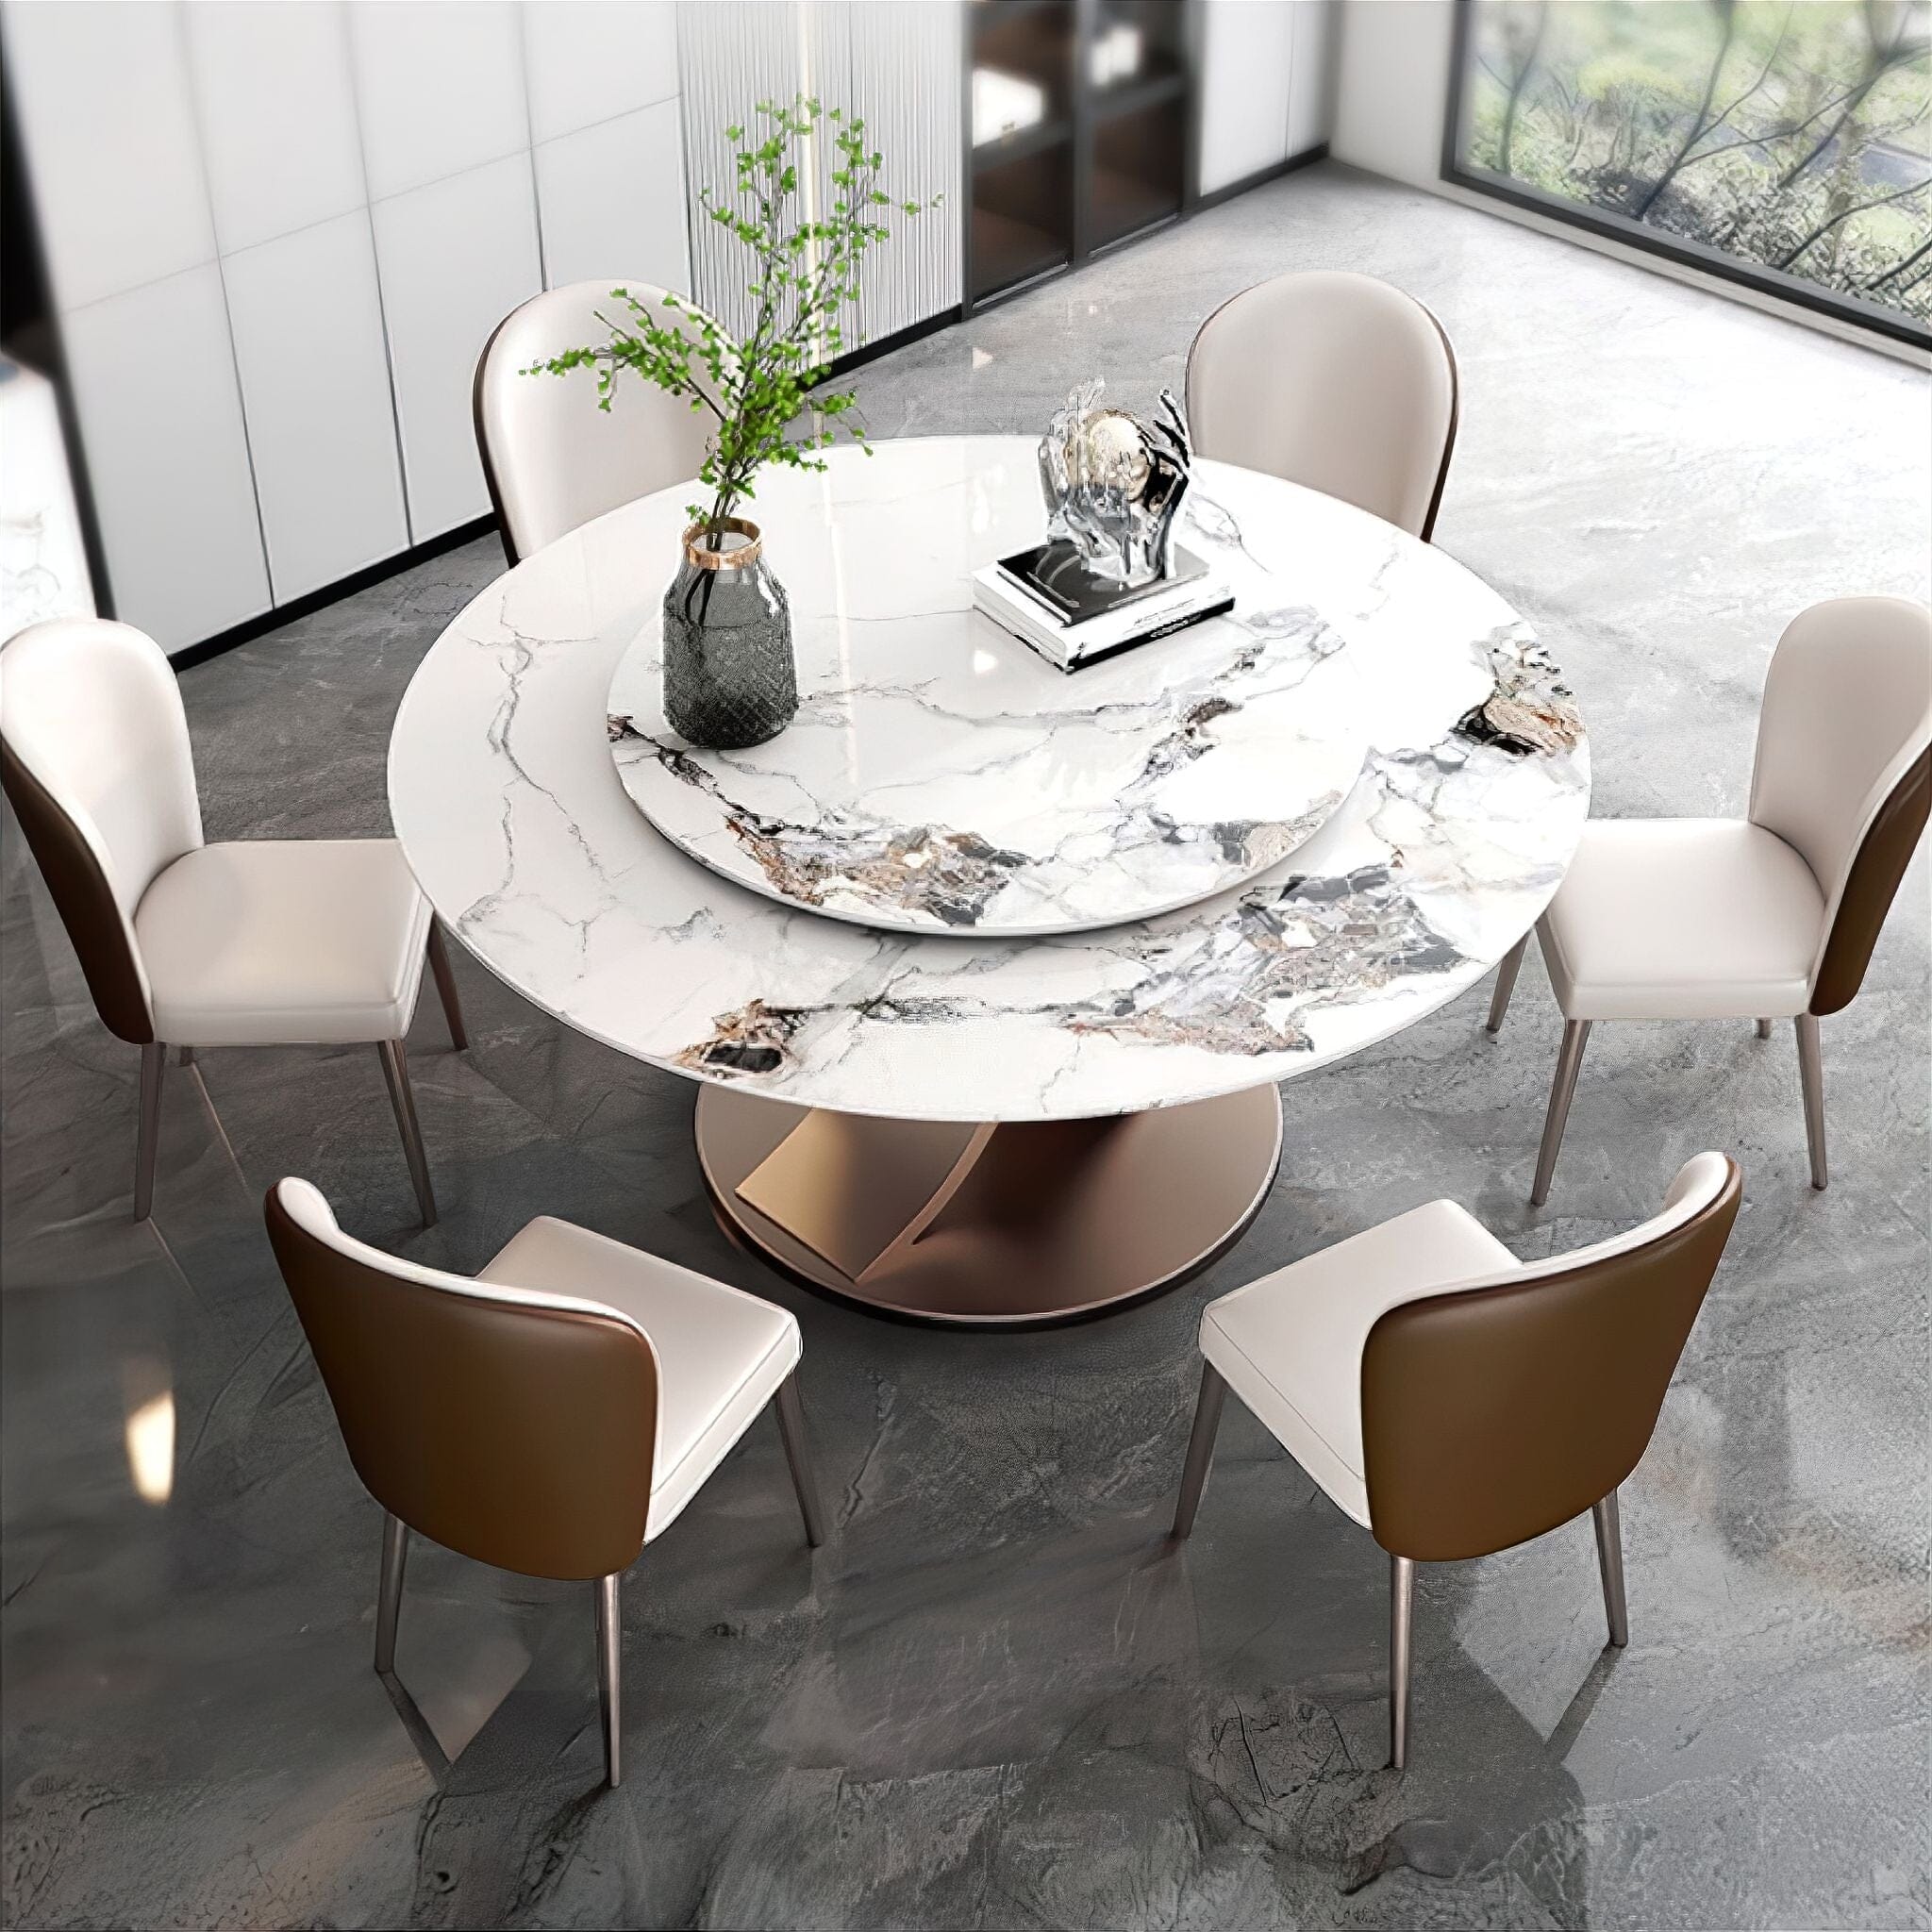 Solange Slate Dining Table Dining Table 